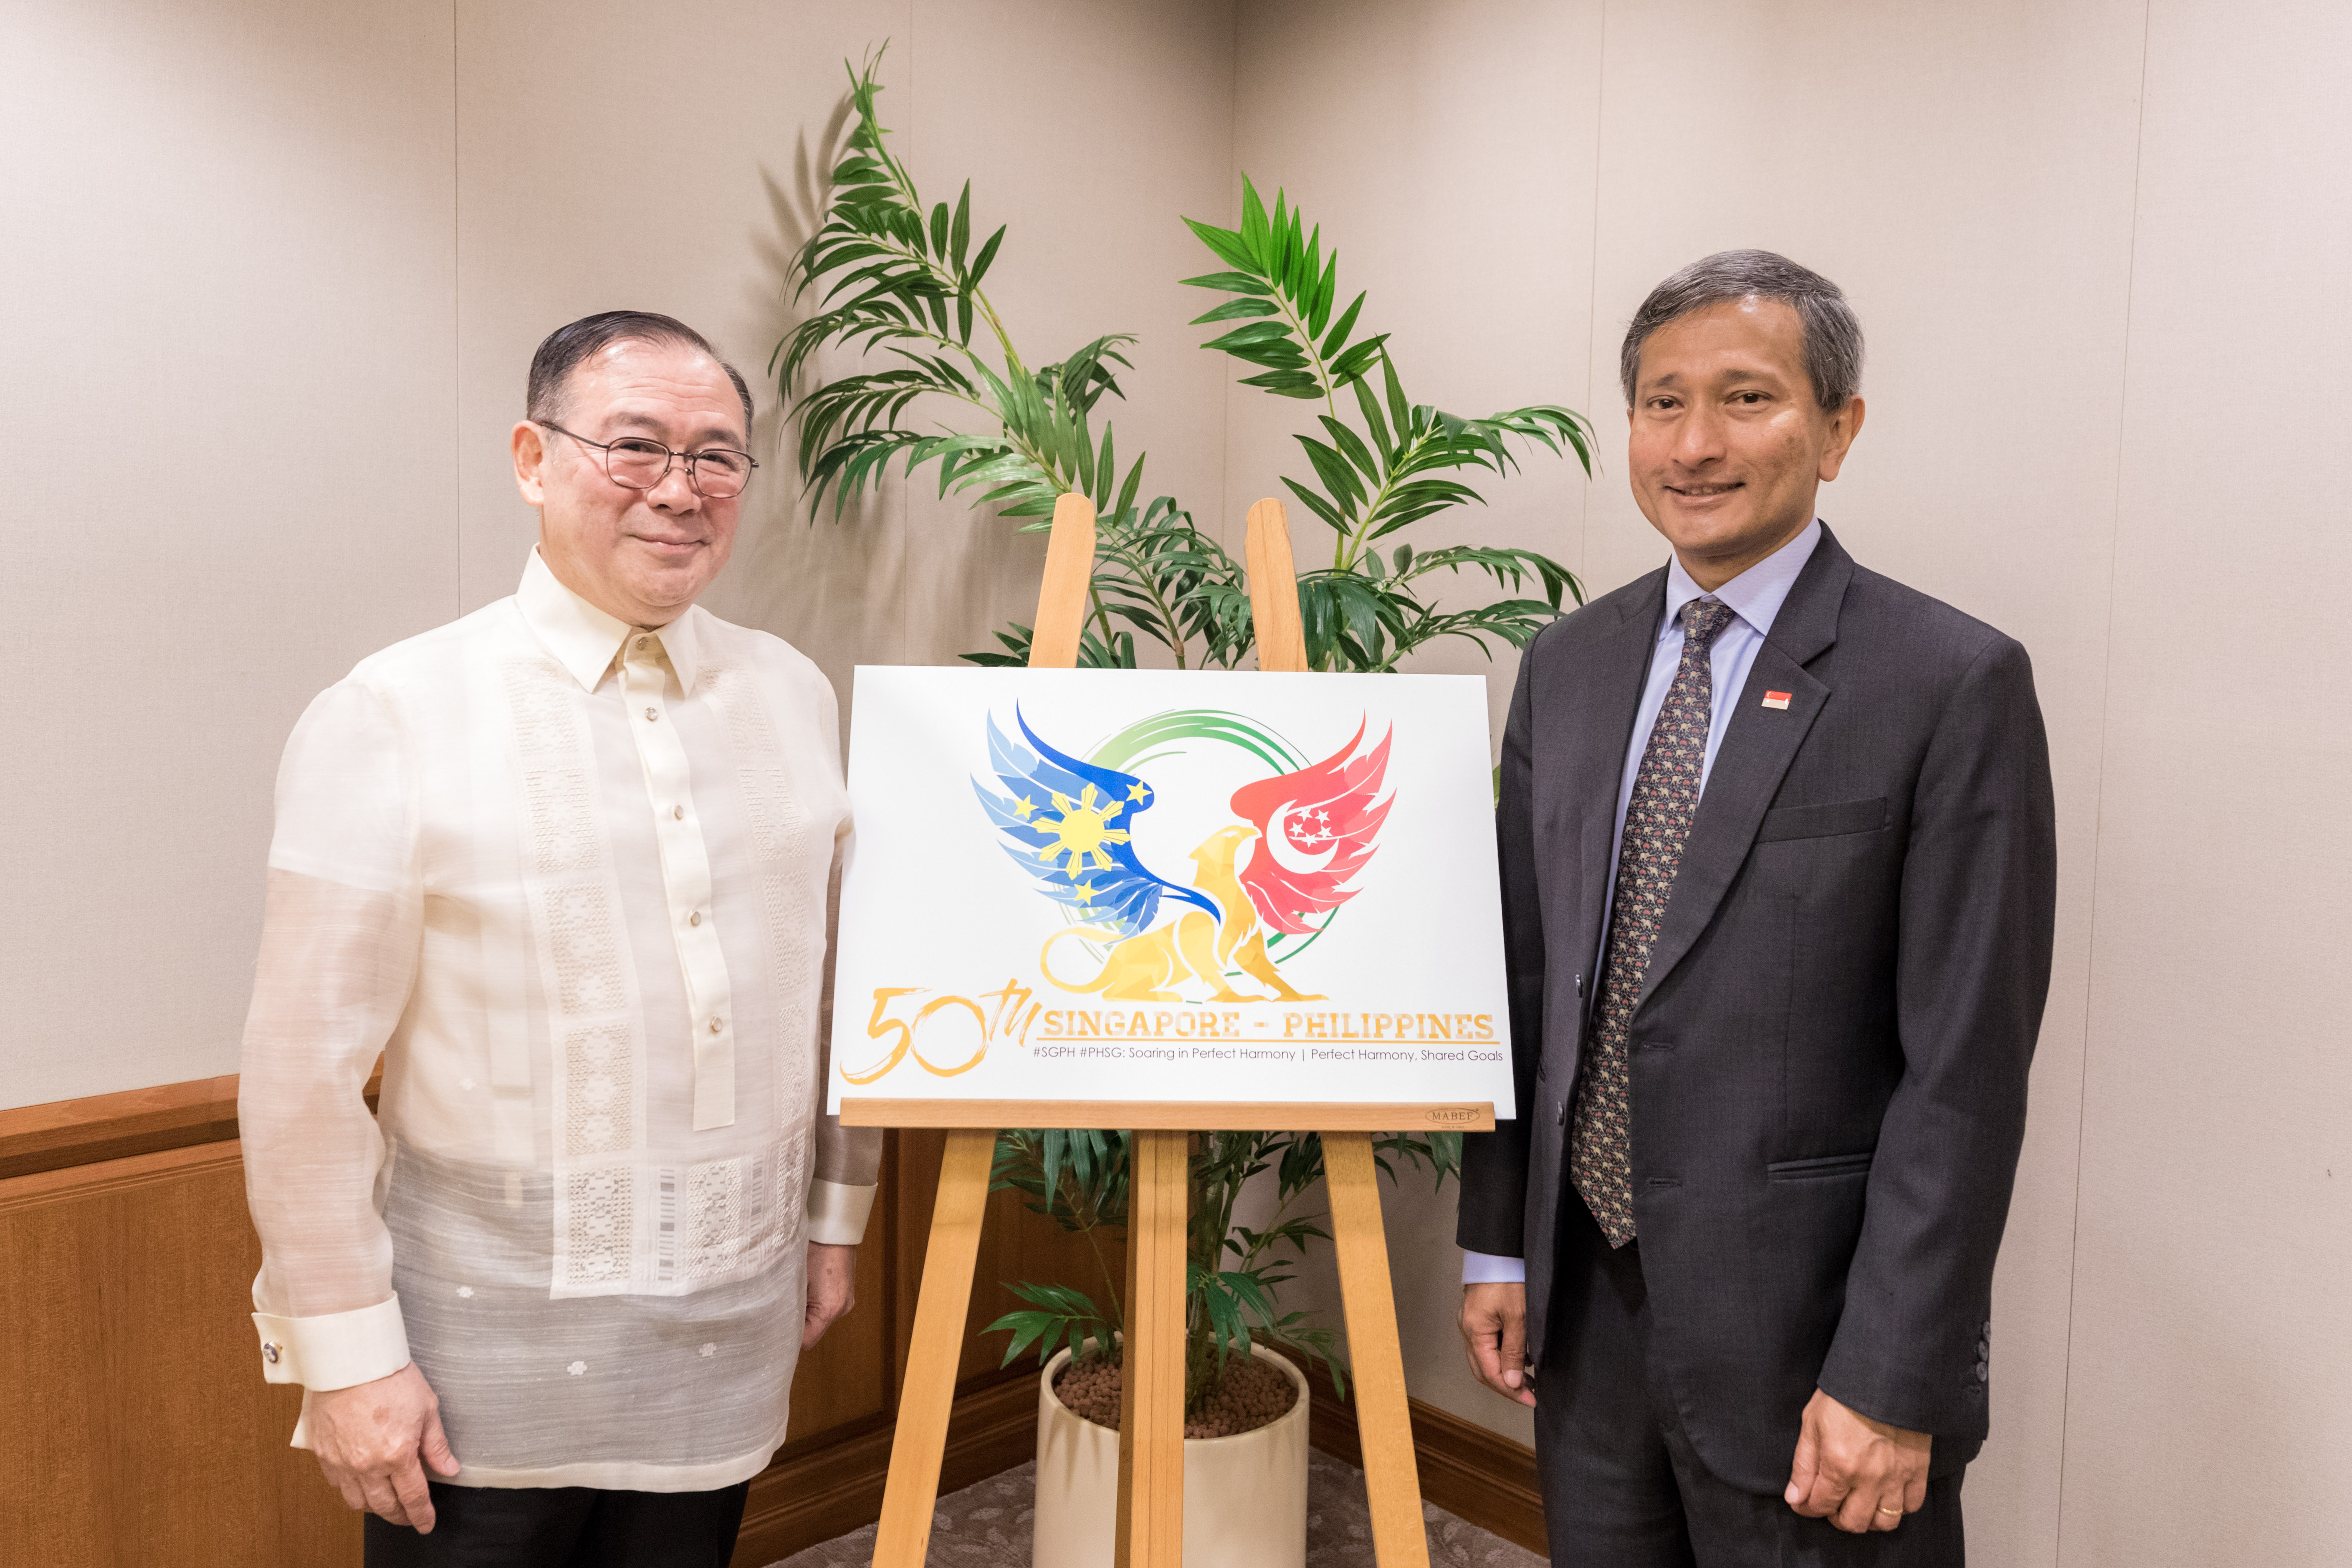 Secretary of Foreign Affairs of the Republic of the Philippines Teodoro L Locsin, Jr. and Minister for Foreign Affairs Dr Vivian Balakrishnan unveiled the commemorative logo for the 50th anniversary of Singapore-Philippines diplomatic relations, 8 May 2019